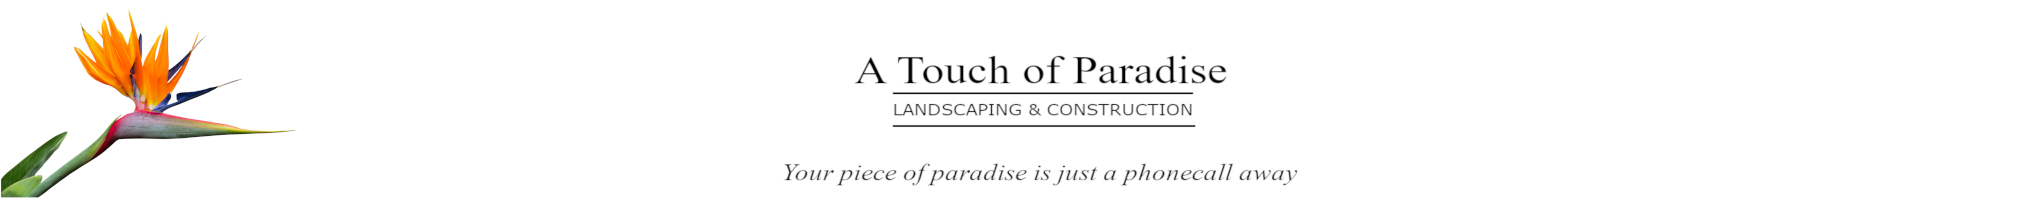 A Touch of Paradise Landscaping